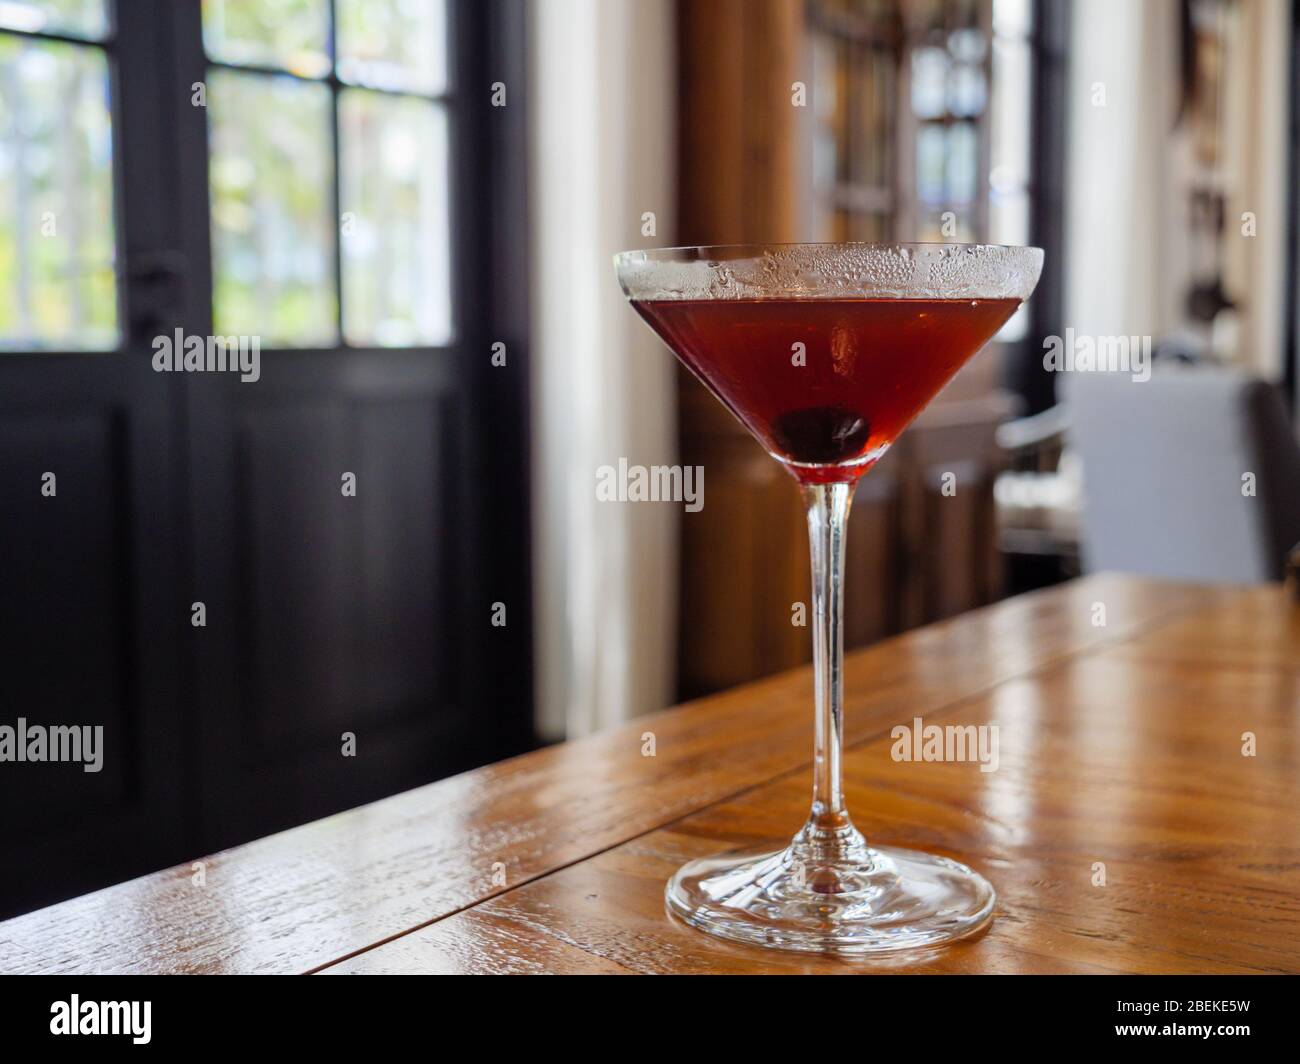 Red-brown cocktail with an olive in a martini glass during daytime in home / restaurant setting with copy space Stock Photo